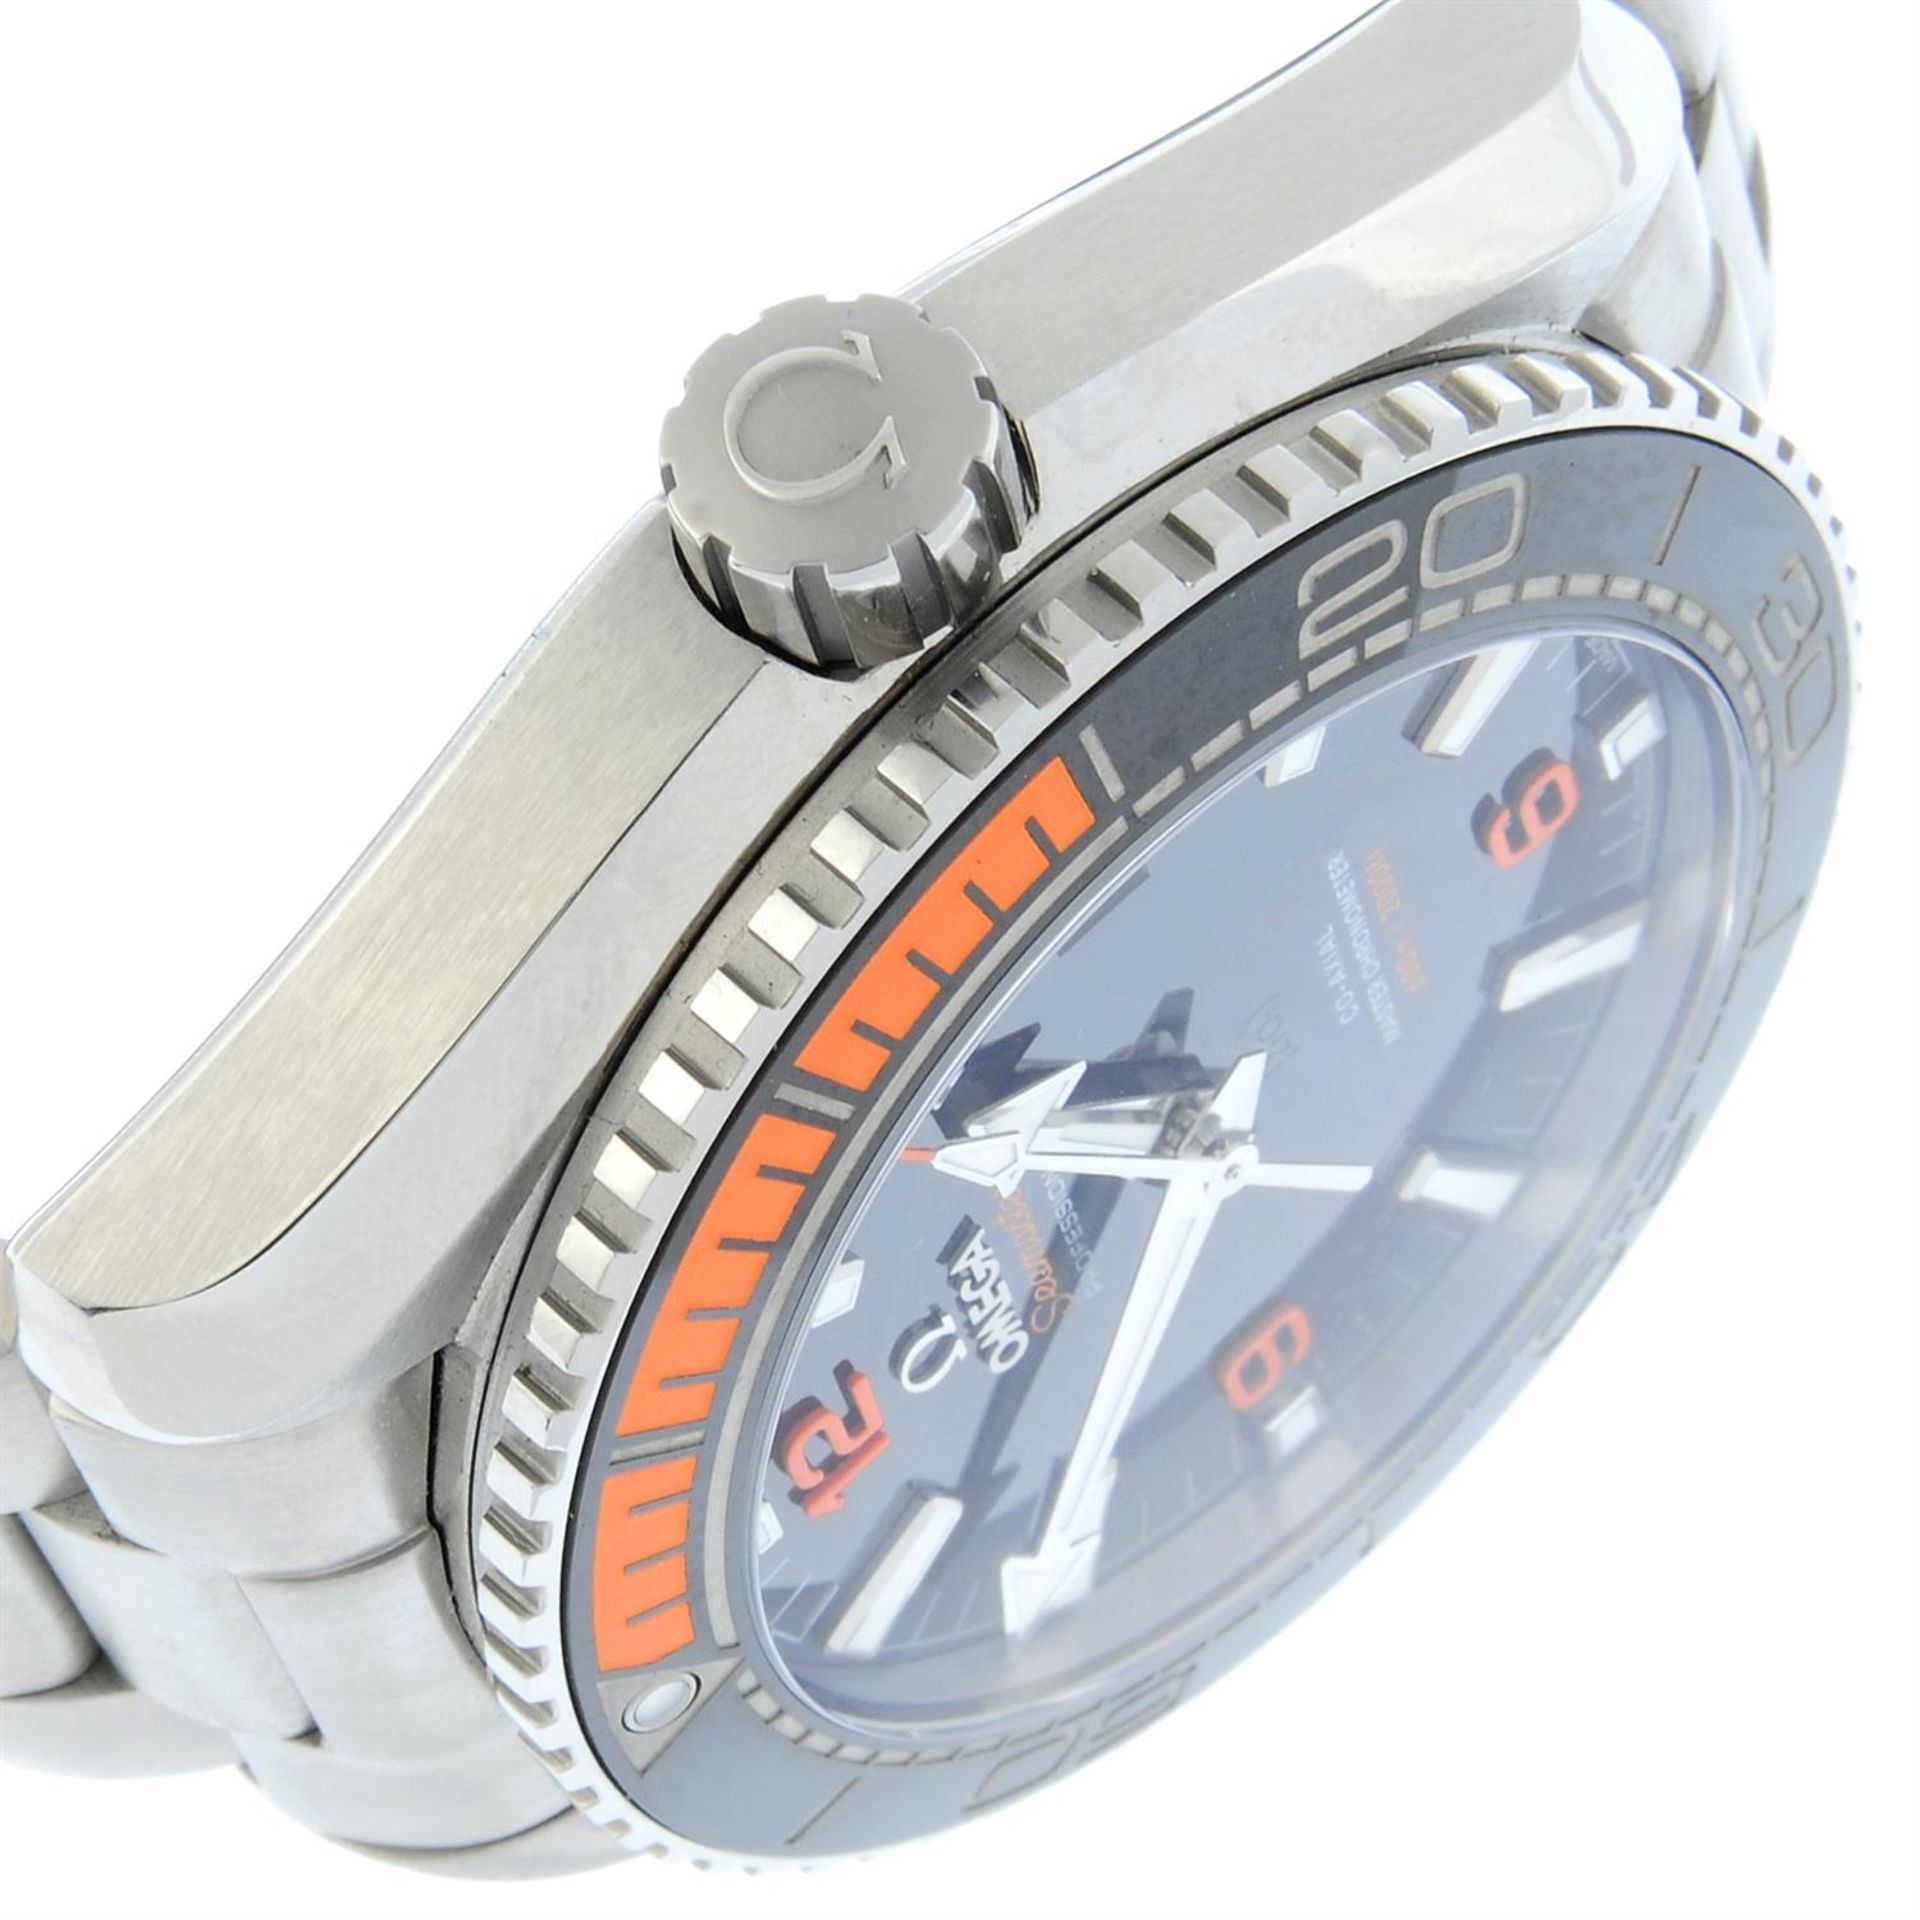 Omega - a Seamaster Planet Ocean Co-Axial bracelet watch, 44mm. - Image 3 of 7